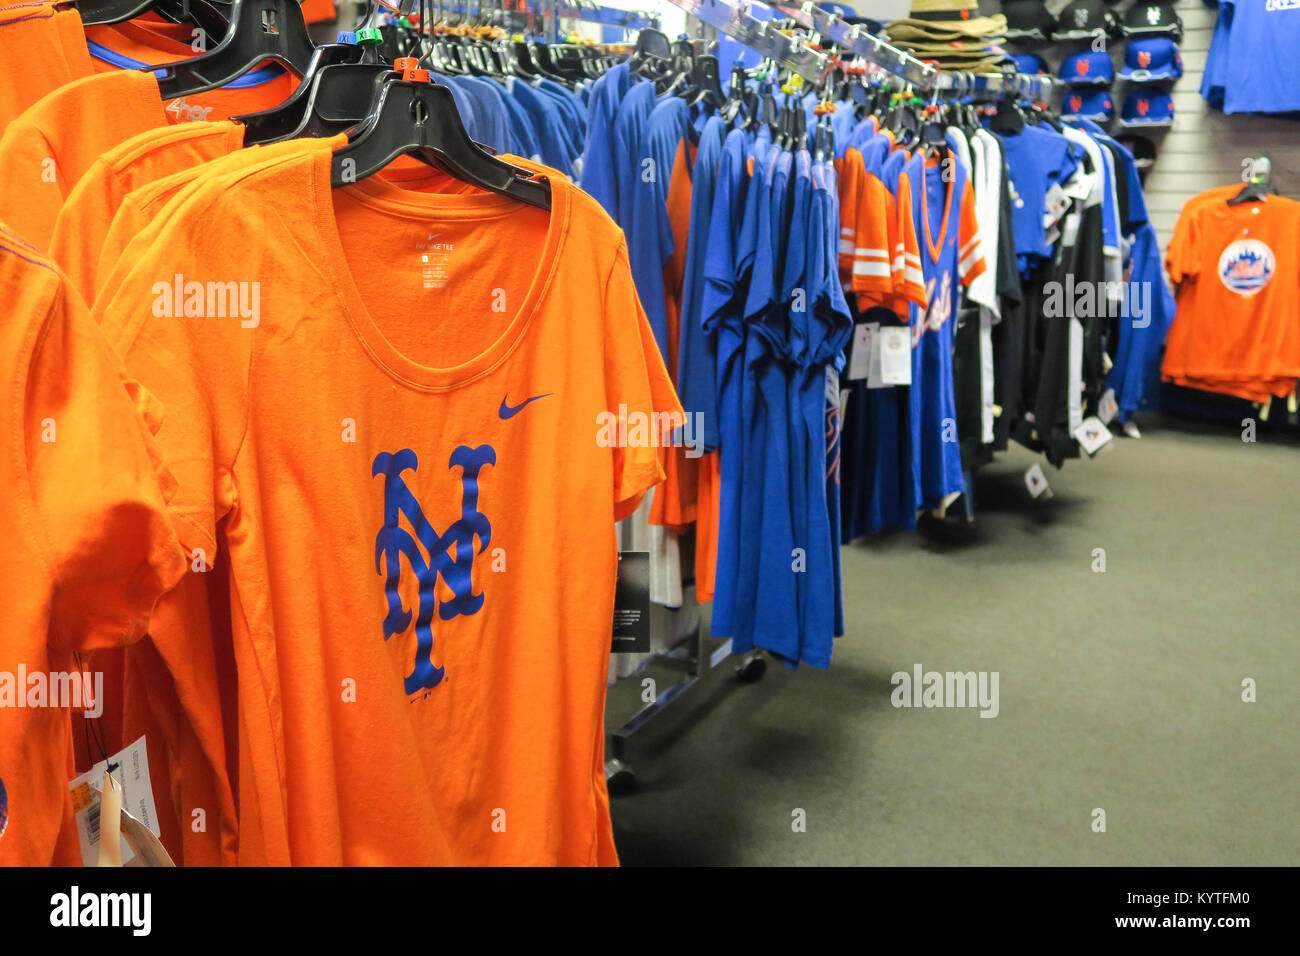 Mets Clubhouse Shop in Midtown Manhattan, NYC, USA Stock Photo - Alamy